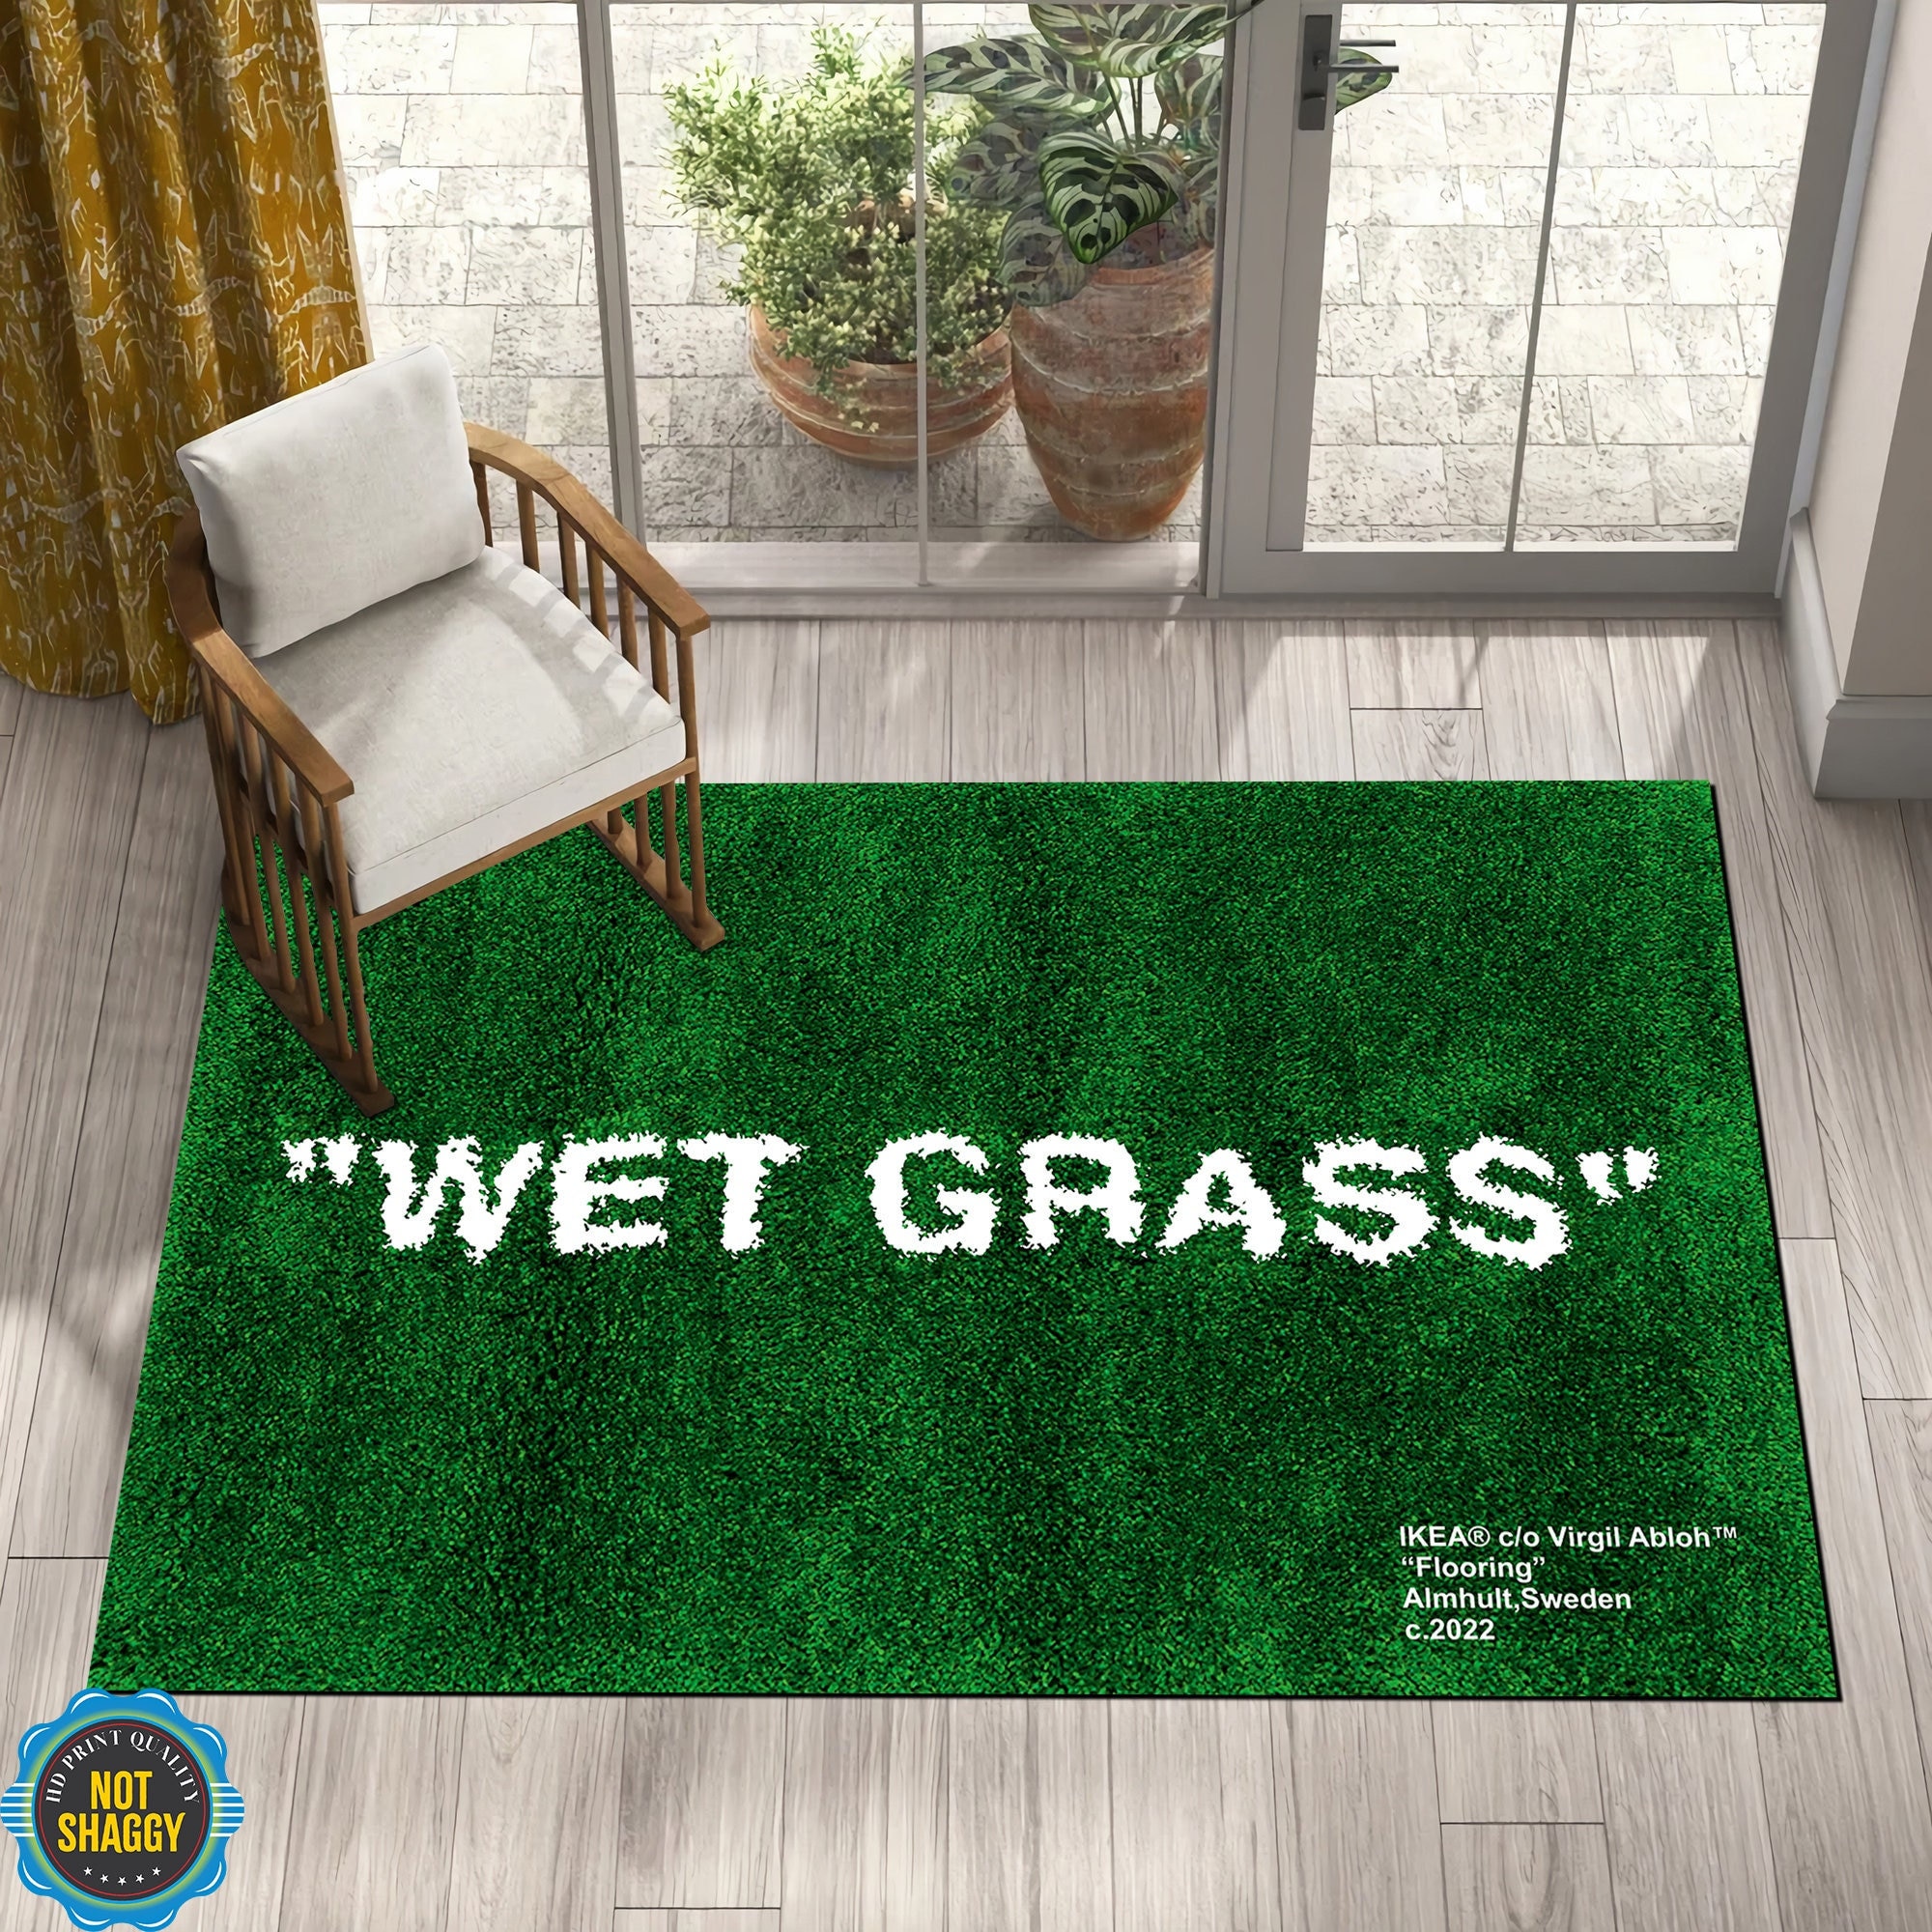 Own the Virgil Abloh x IKEA WET GRASS Rug - Limited Artistry for Your  Interior!